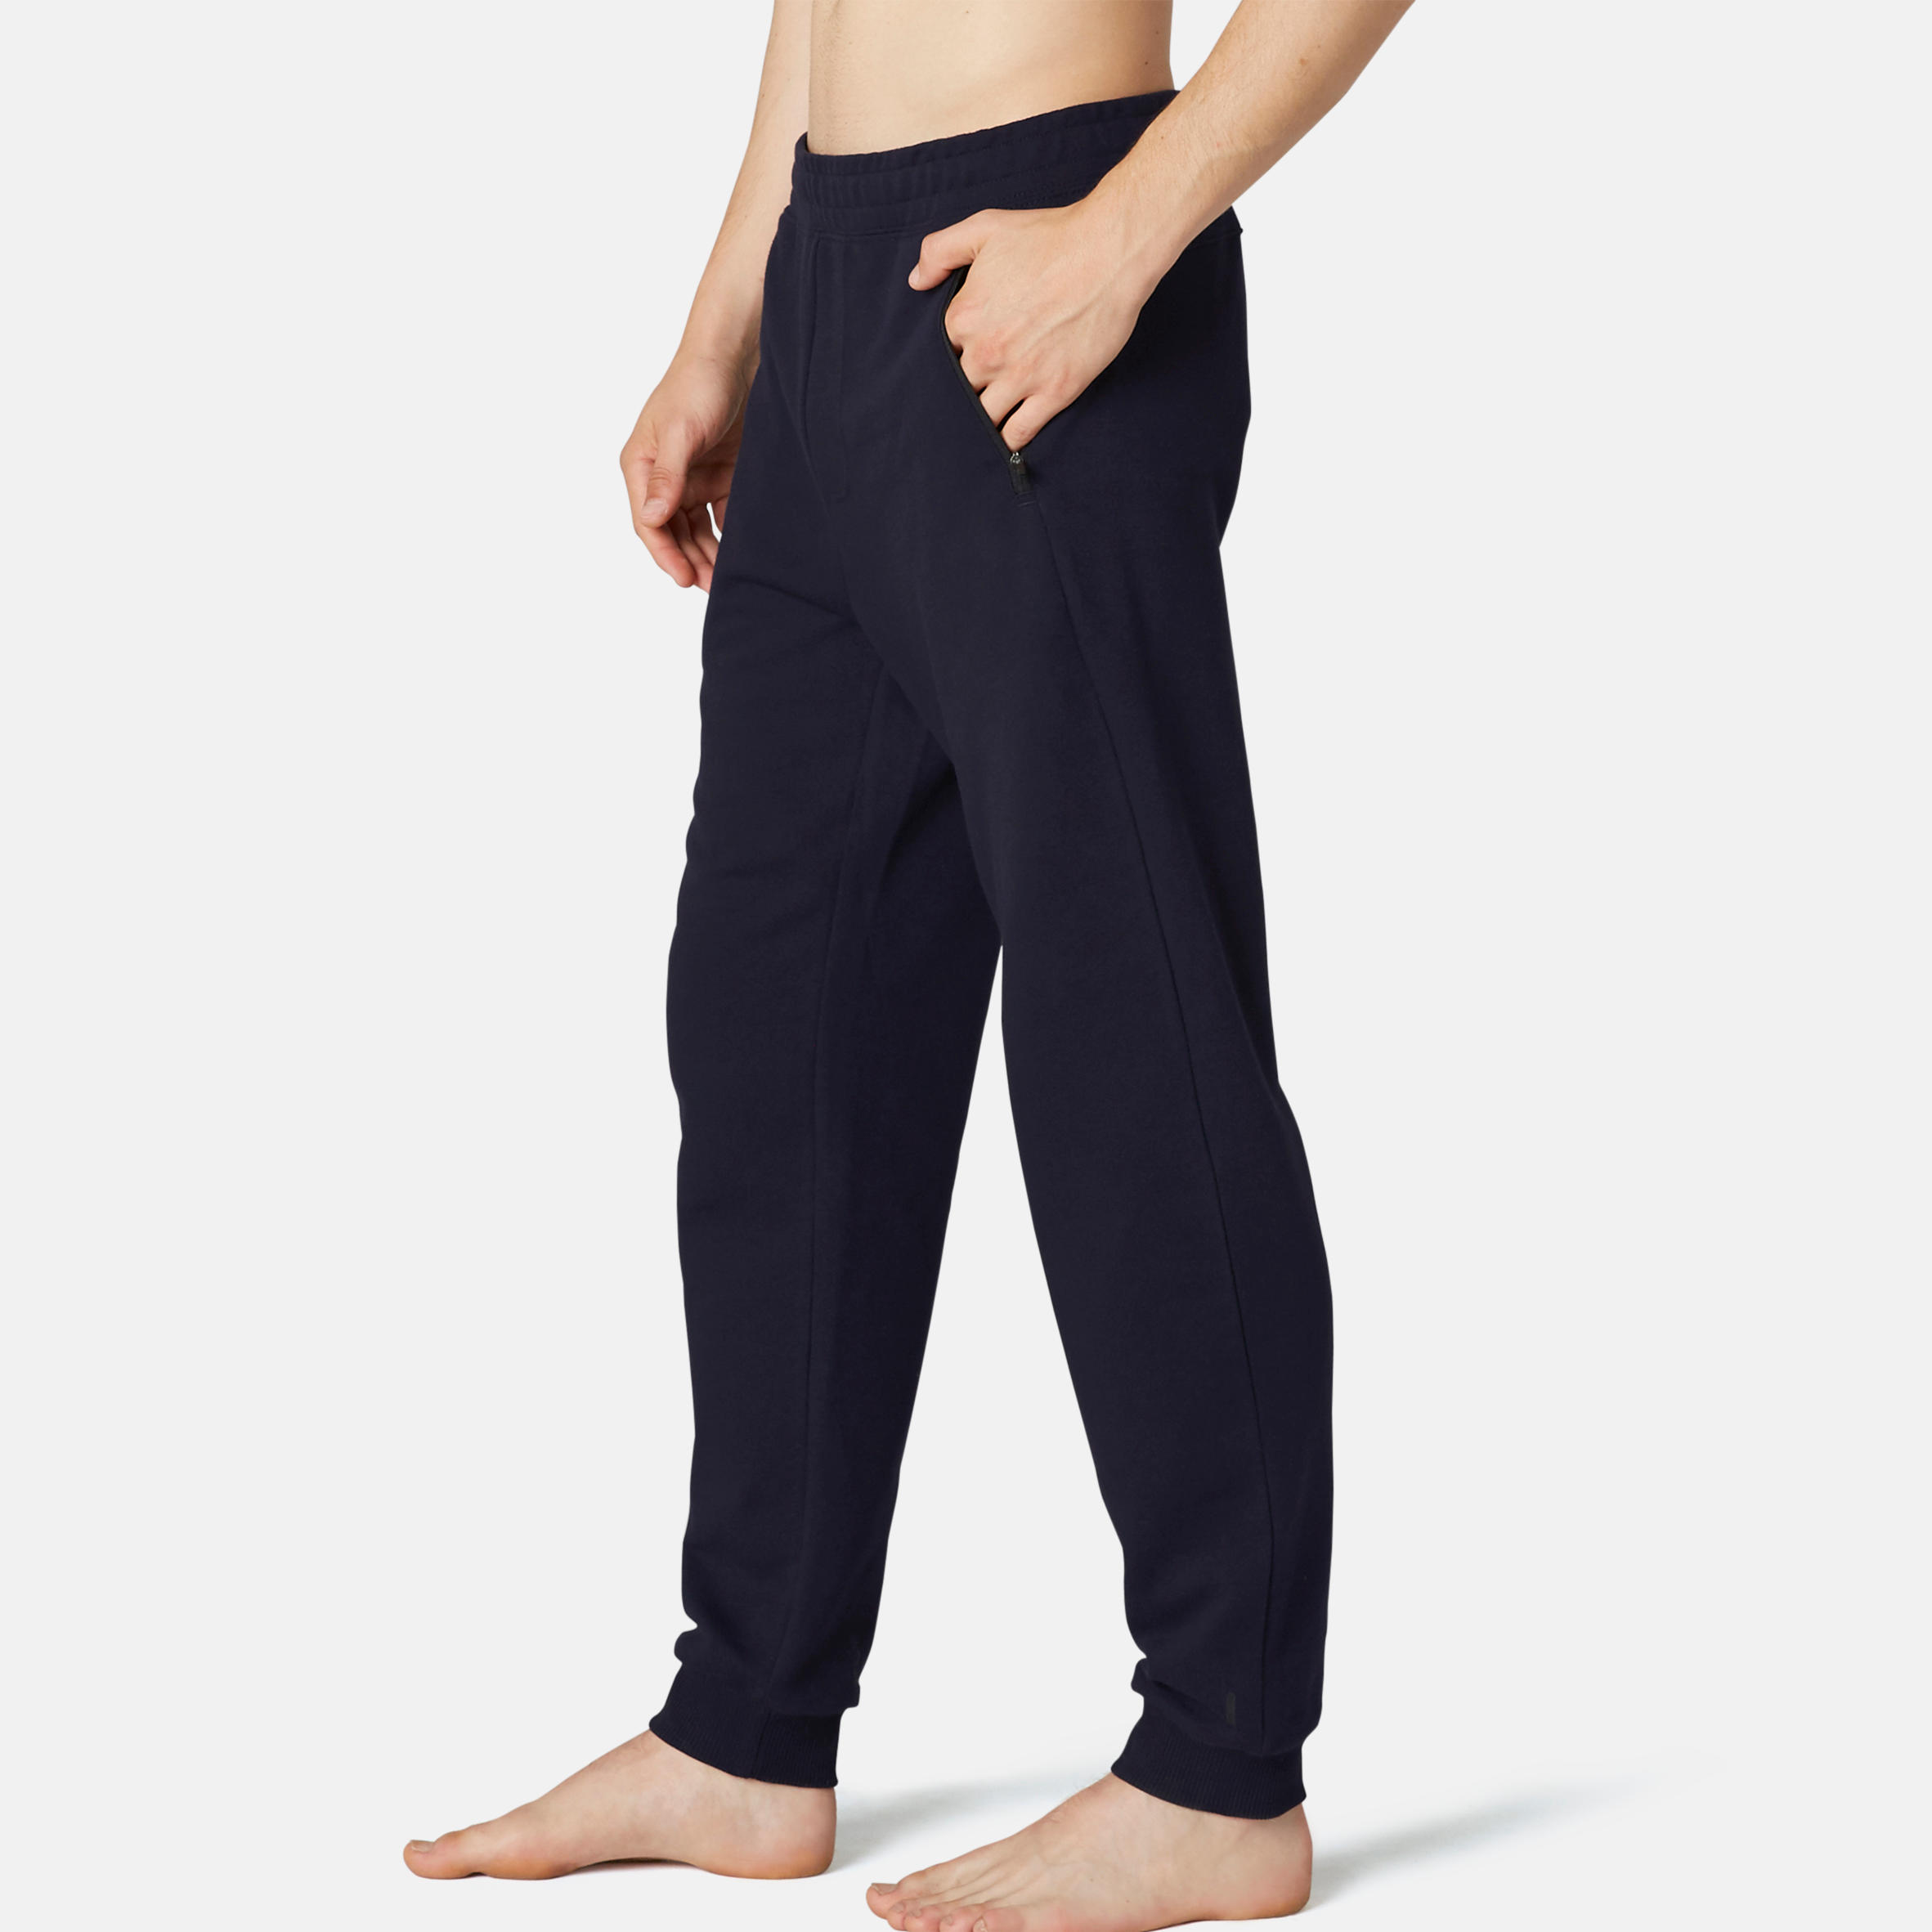 Men's Gym pant Regular fit with Print-Carbon grey By Decathlon